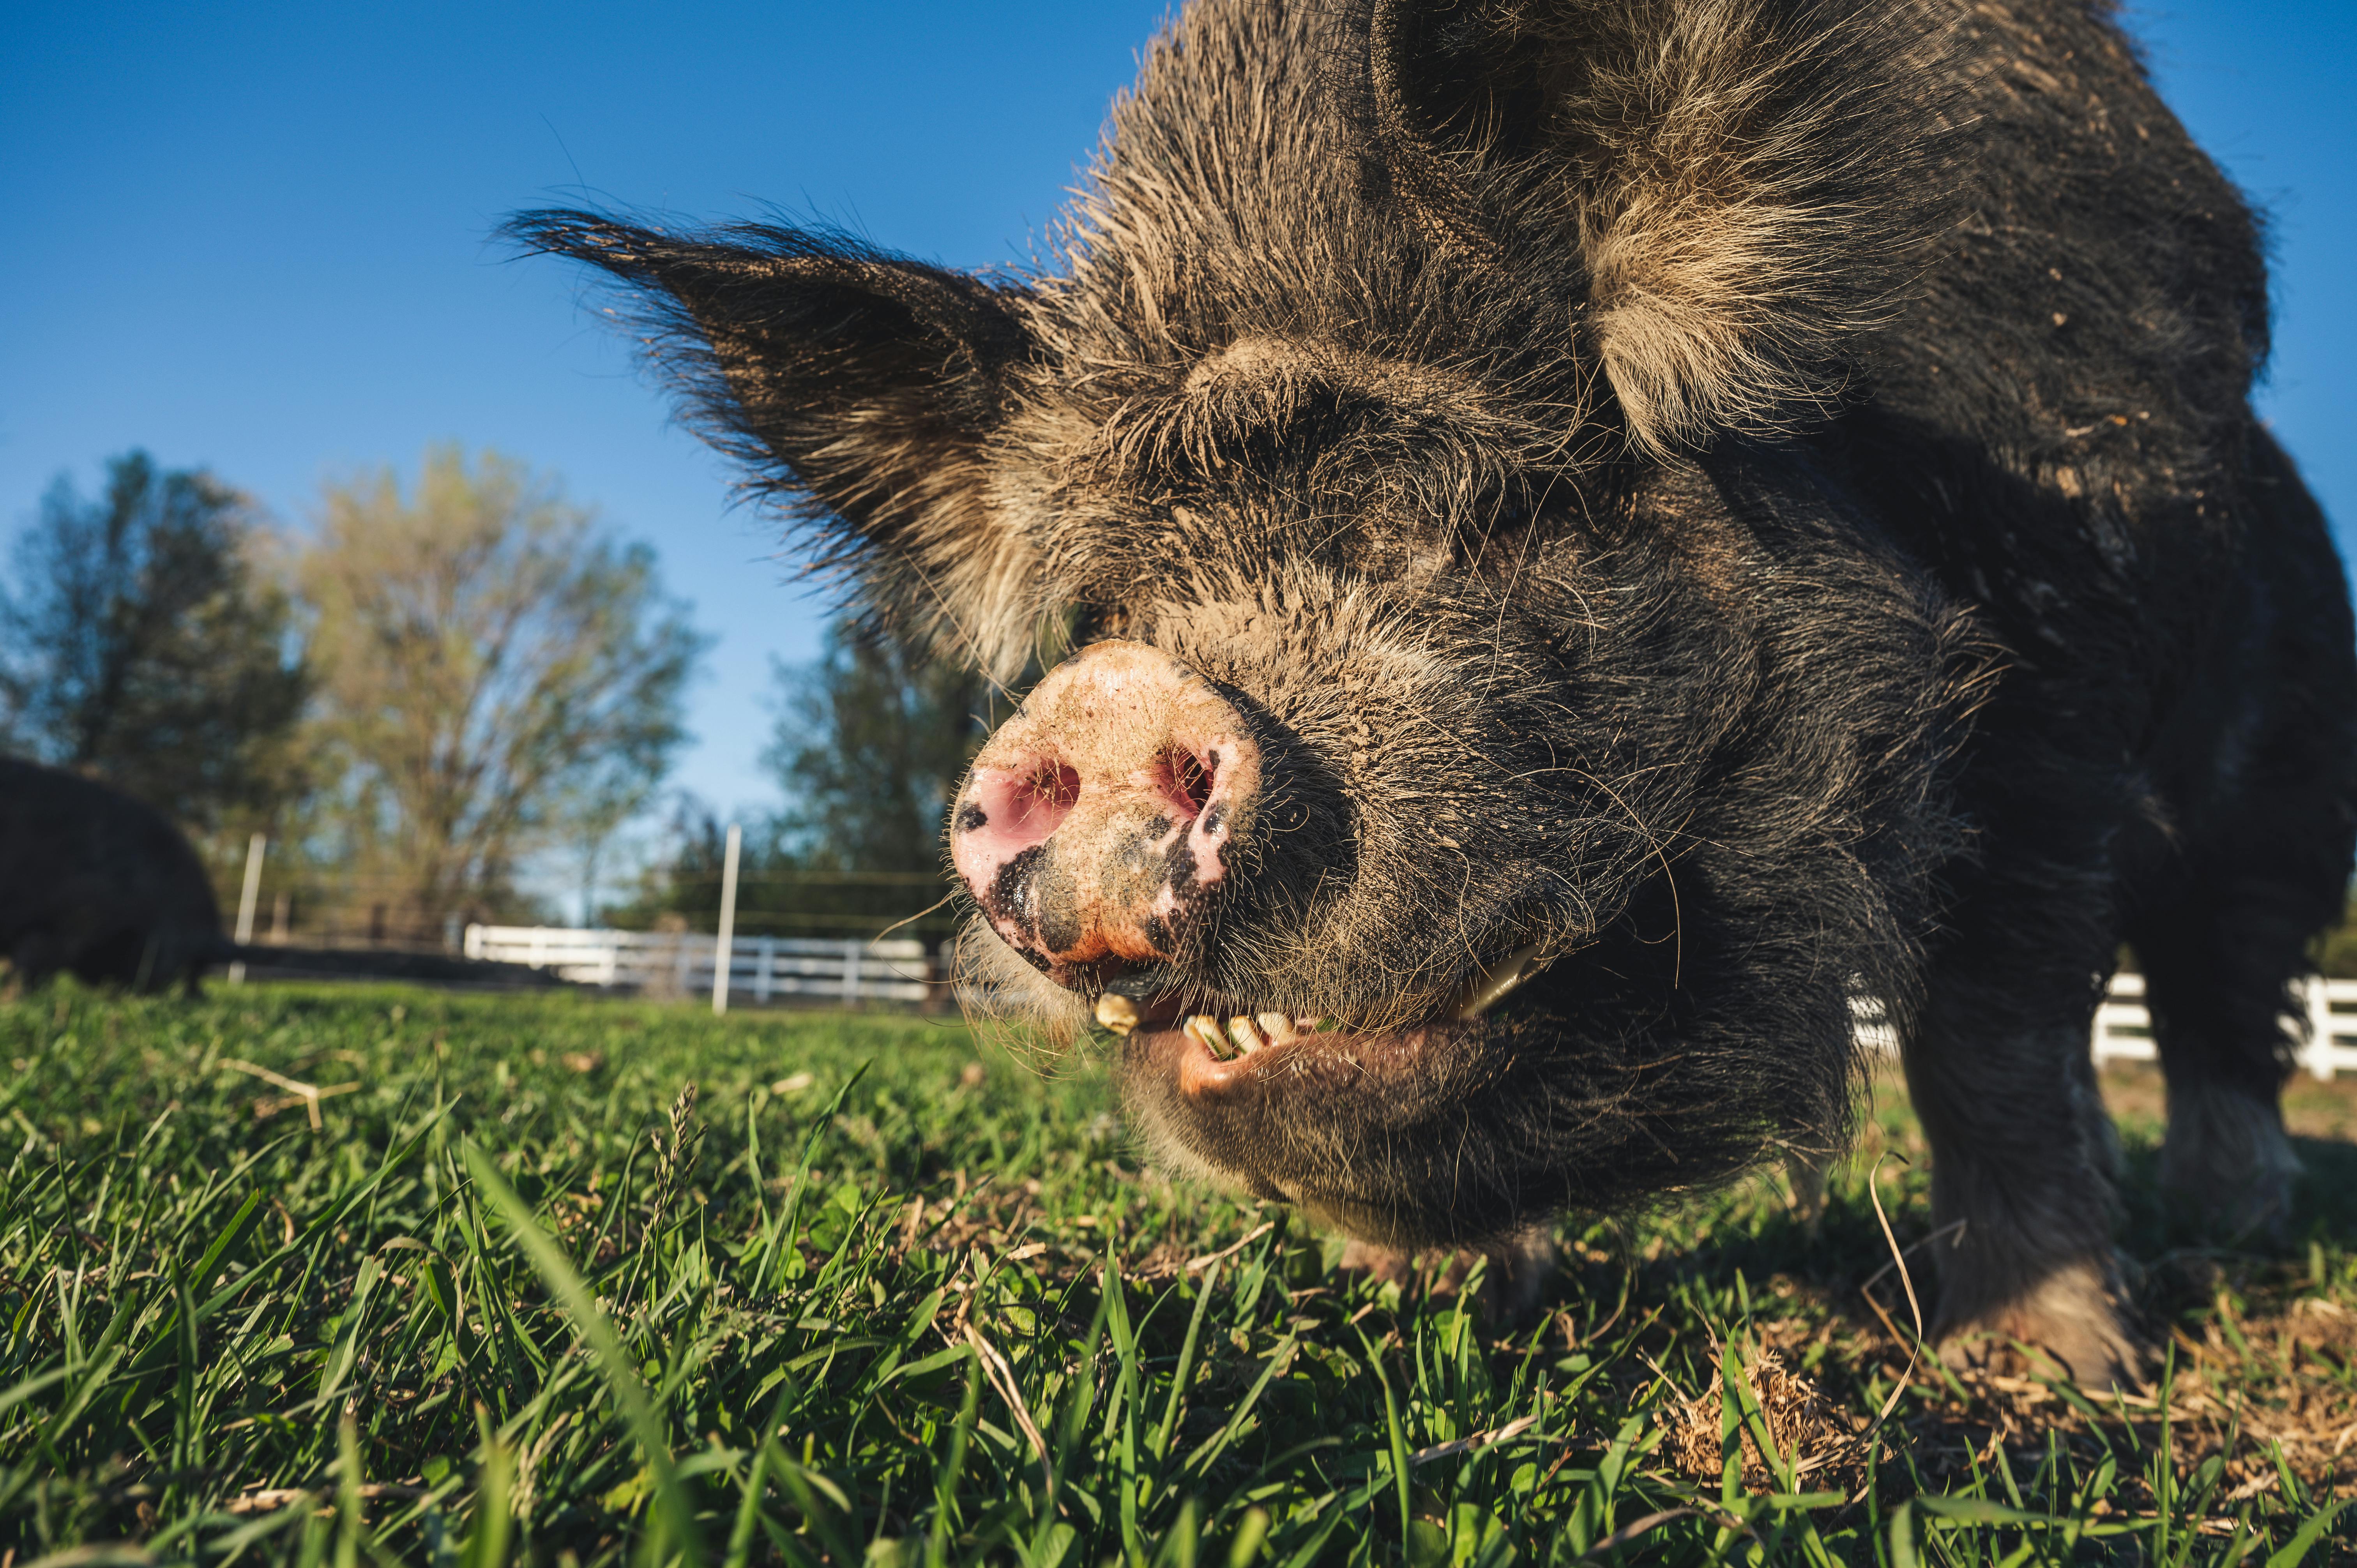 muzzle of big pig eating grass in pasture